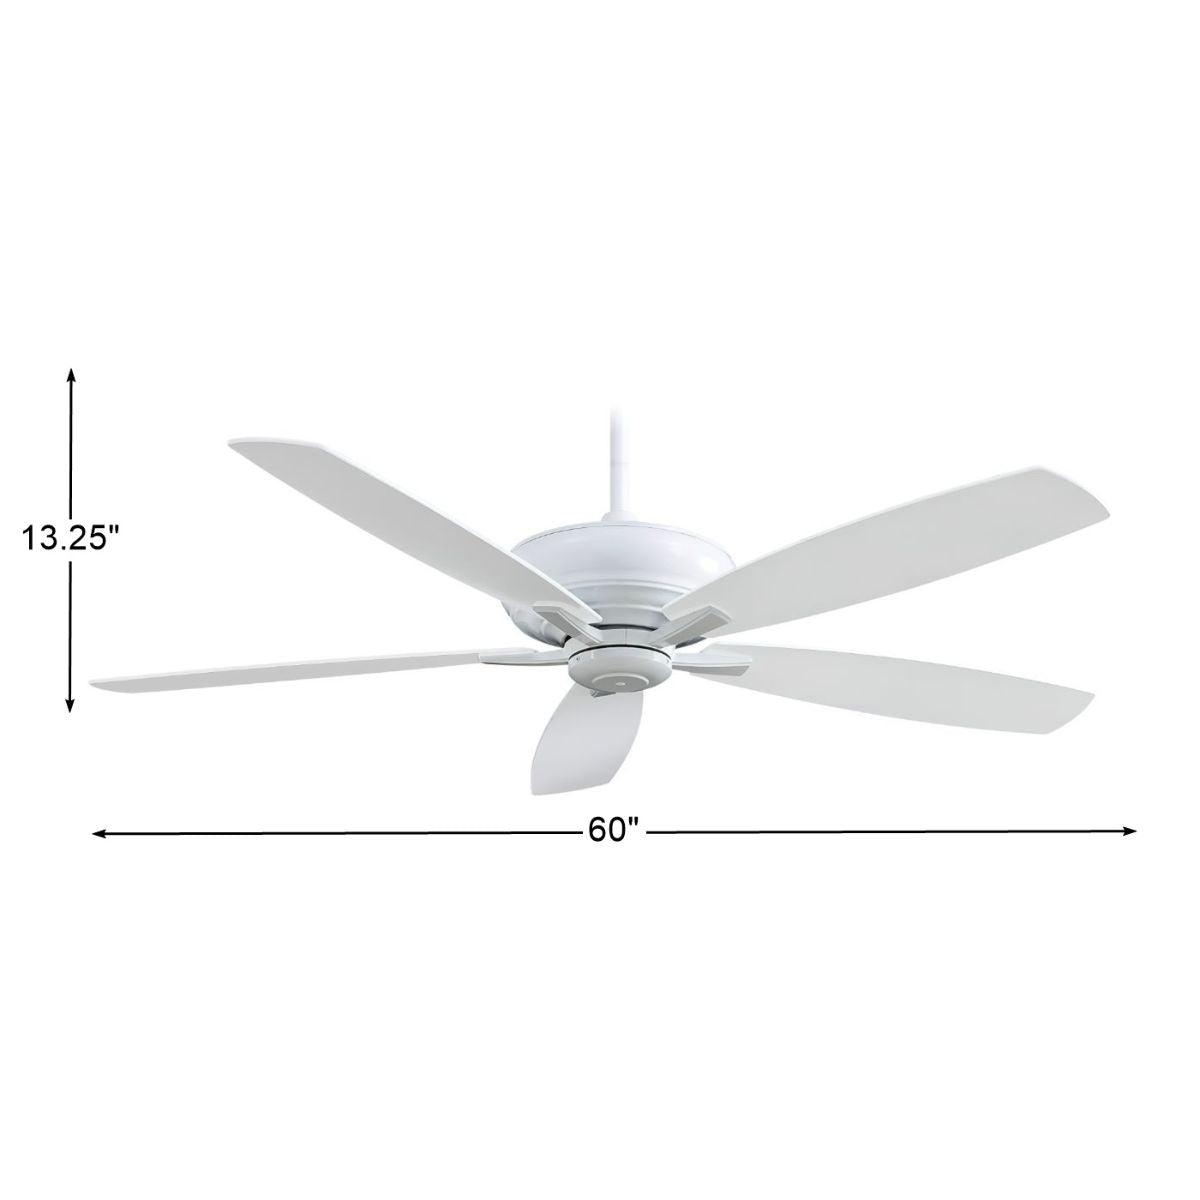 Kola XL 60 Inch Ceiling Fan With Remote, White Finish - Bees Lighting